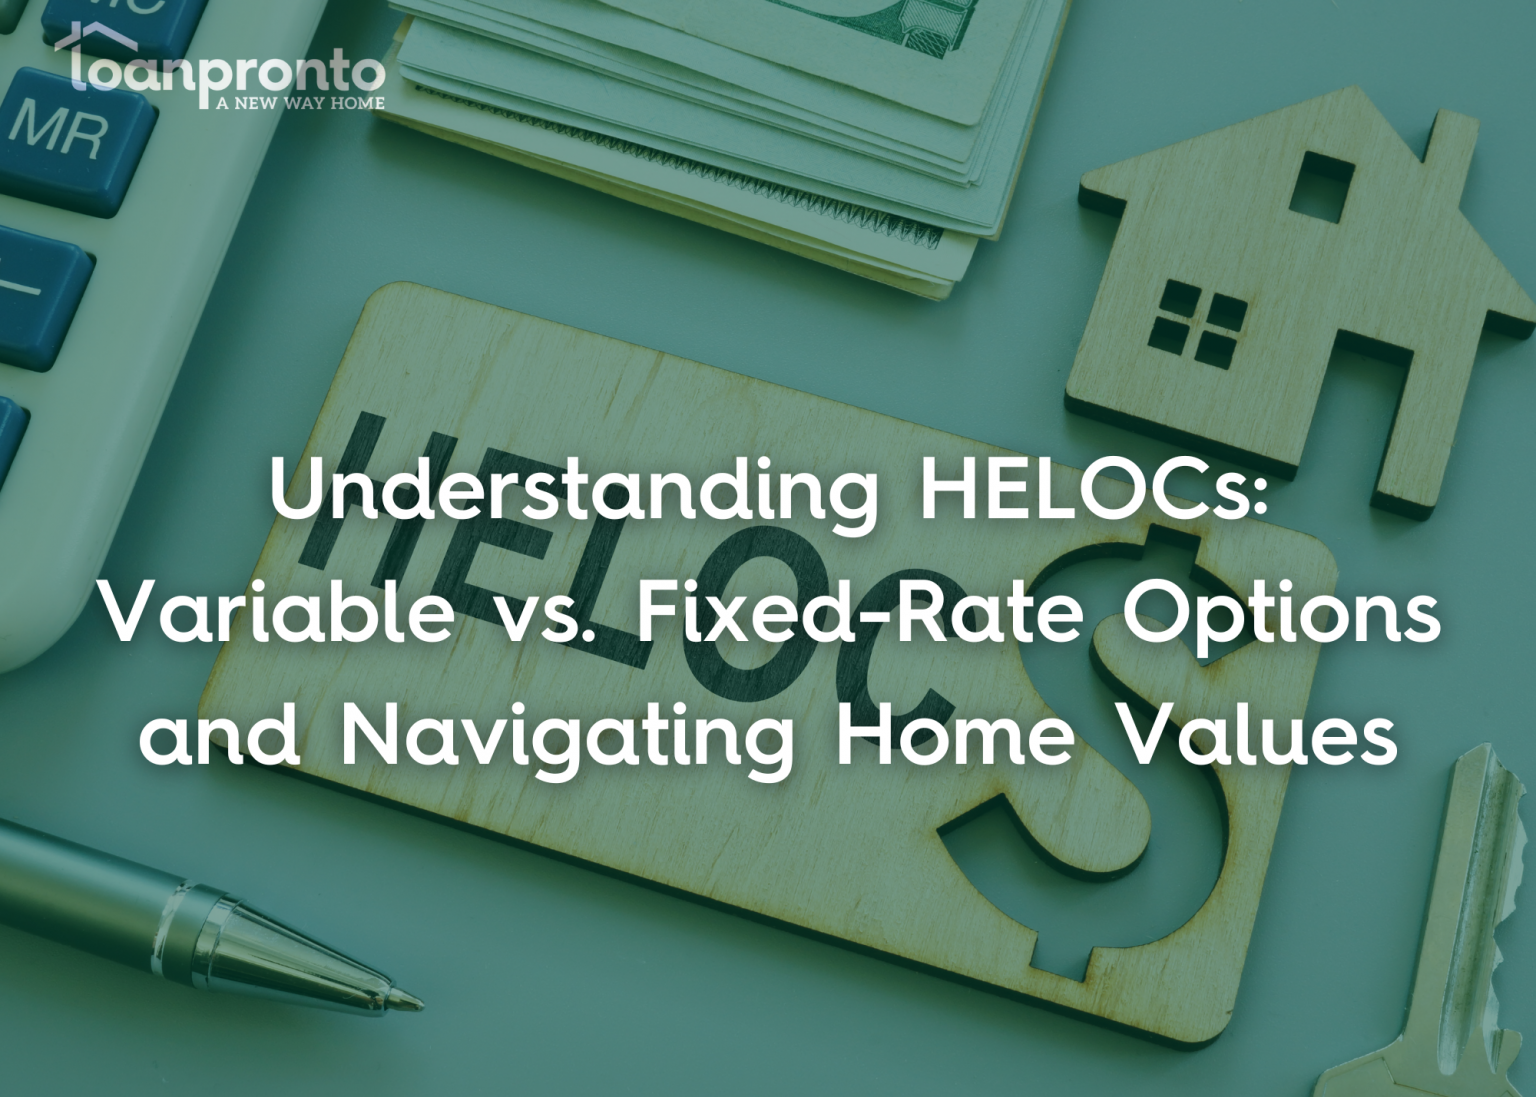 Home equity line of credit, HELOC, fixed-rate vs variable and home values and housing market